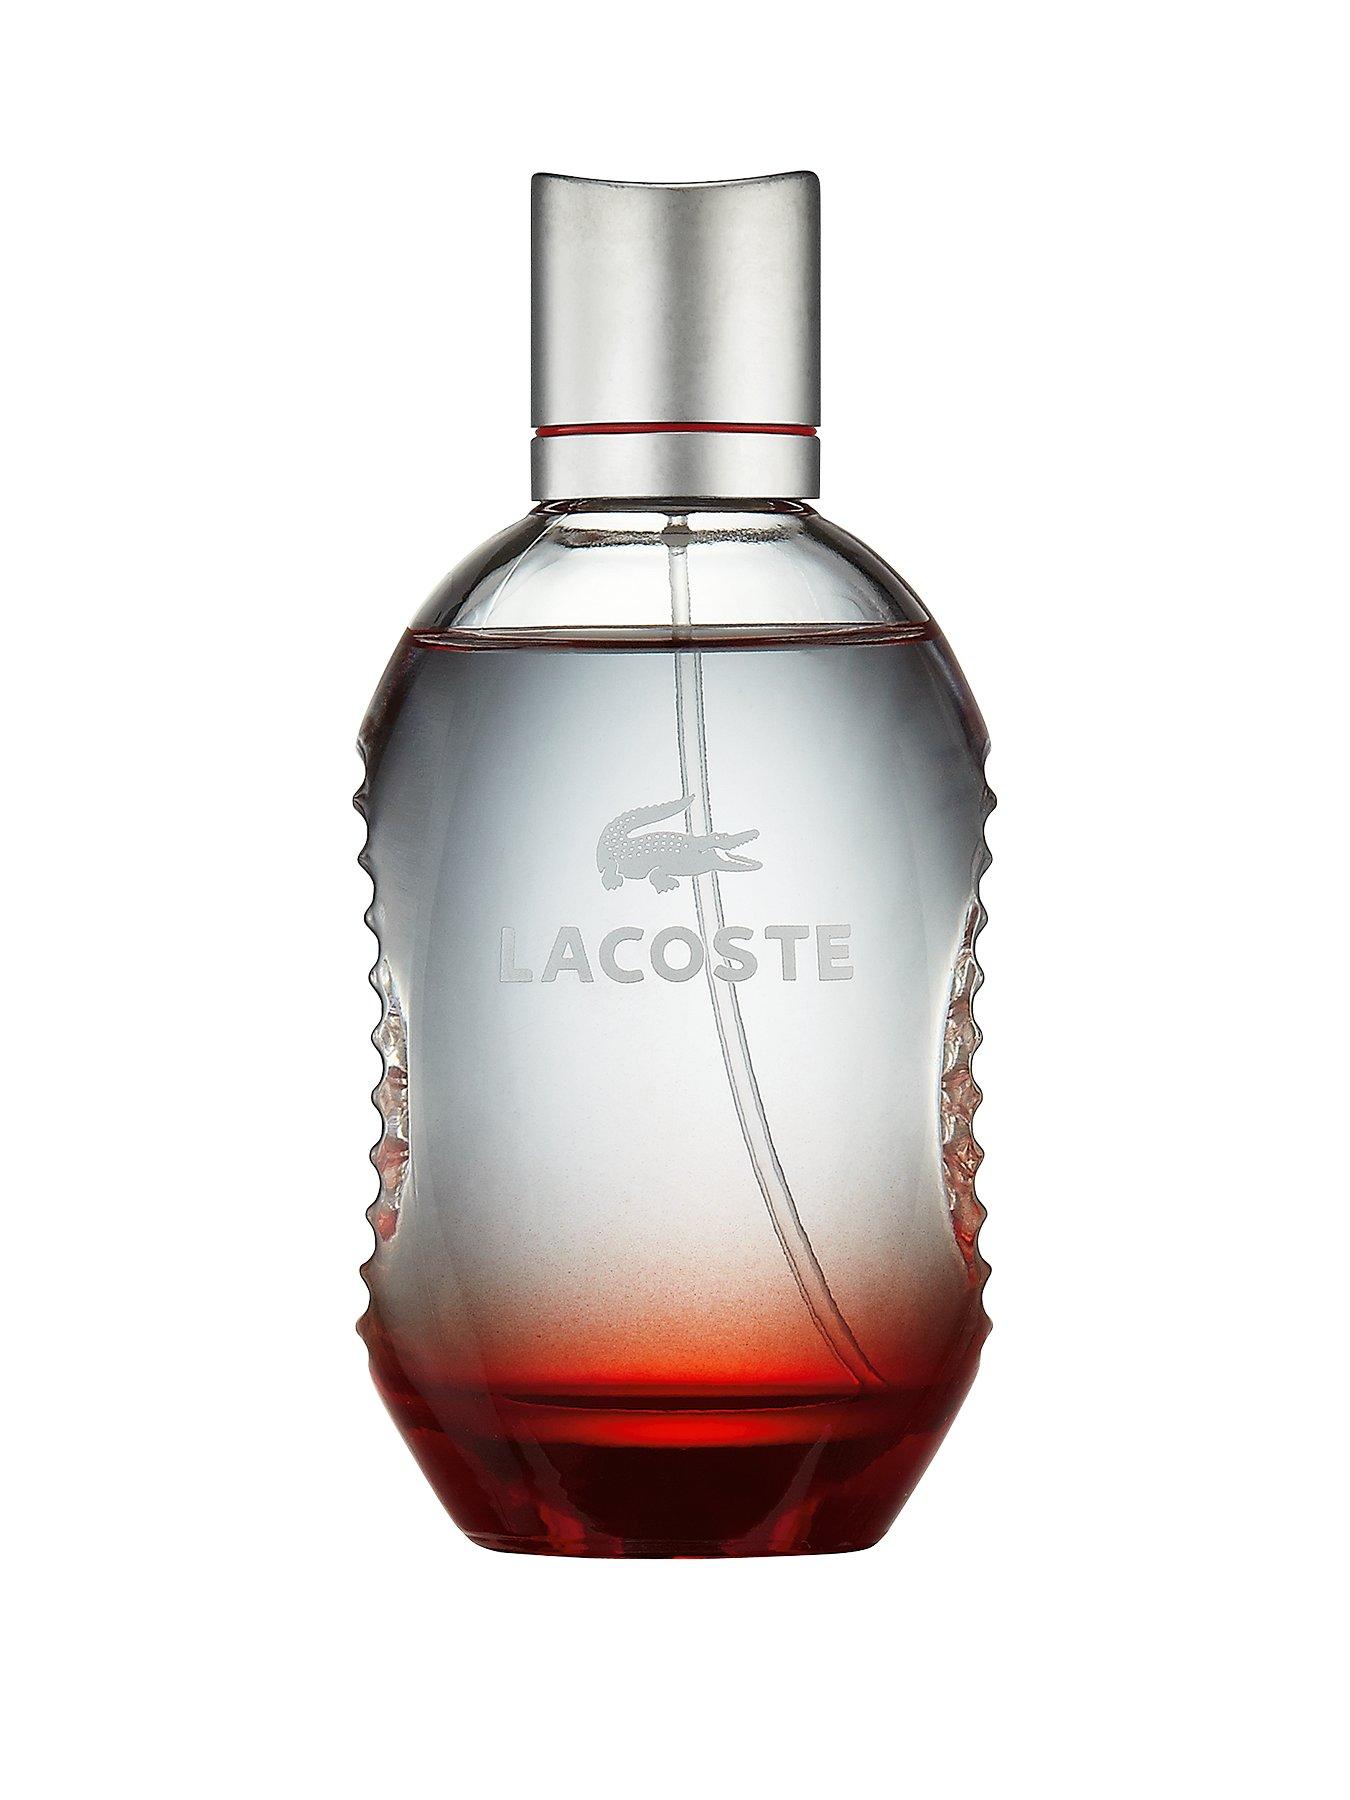 lacoste red 75 ml